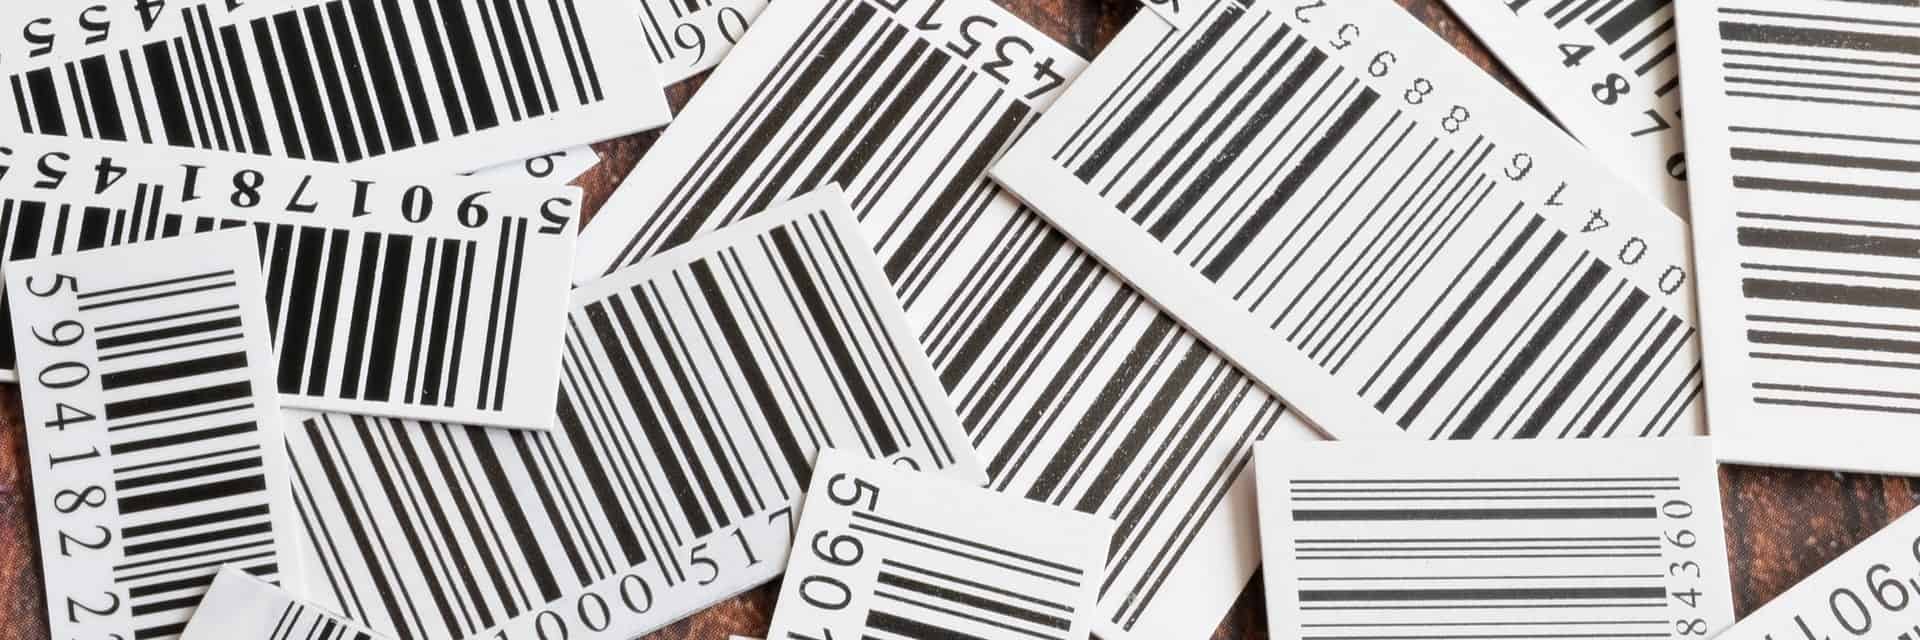 Barcode black and white